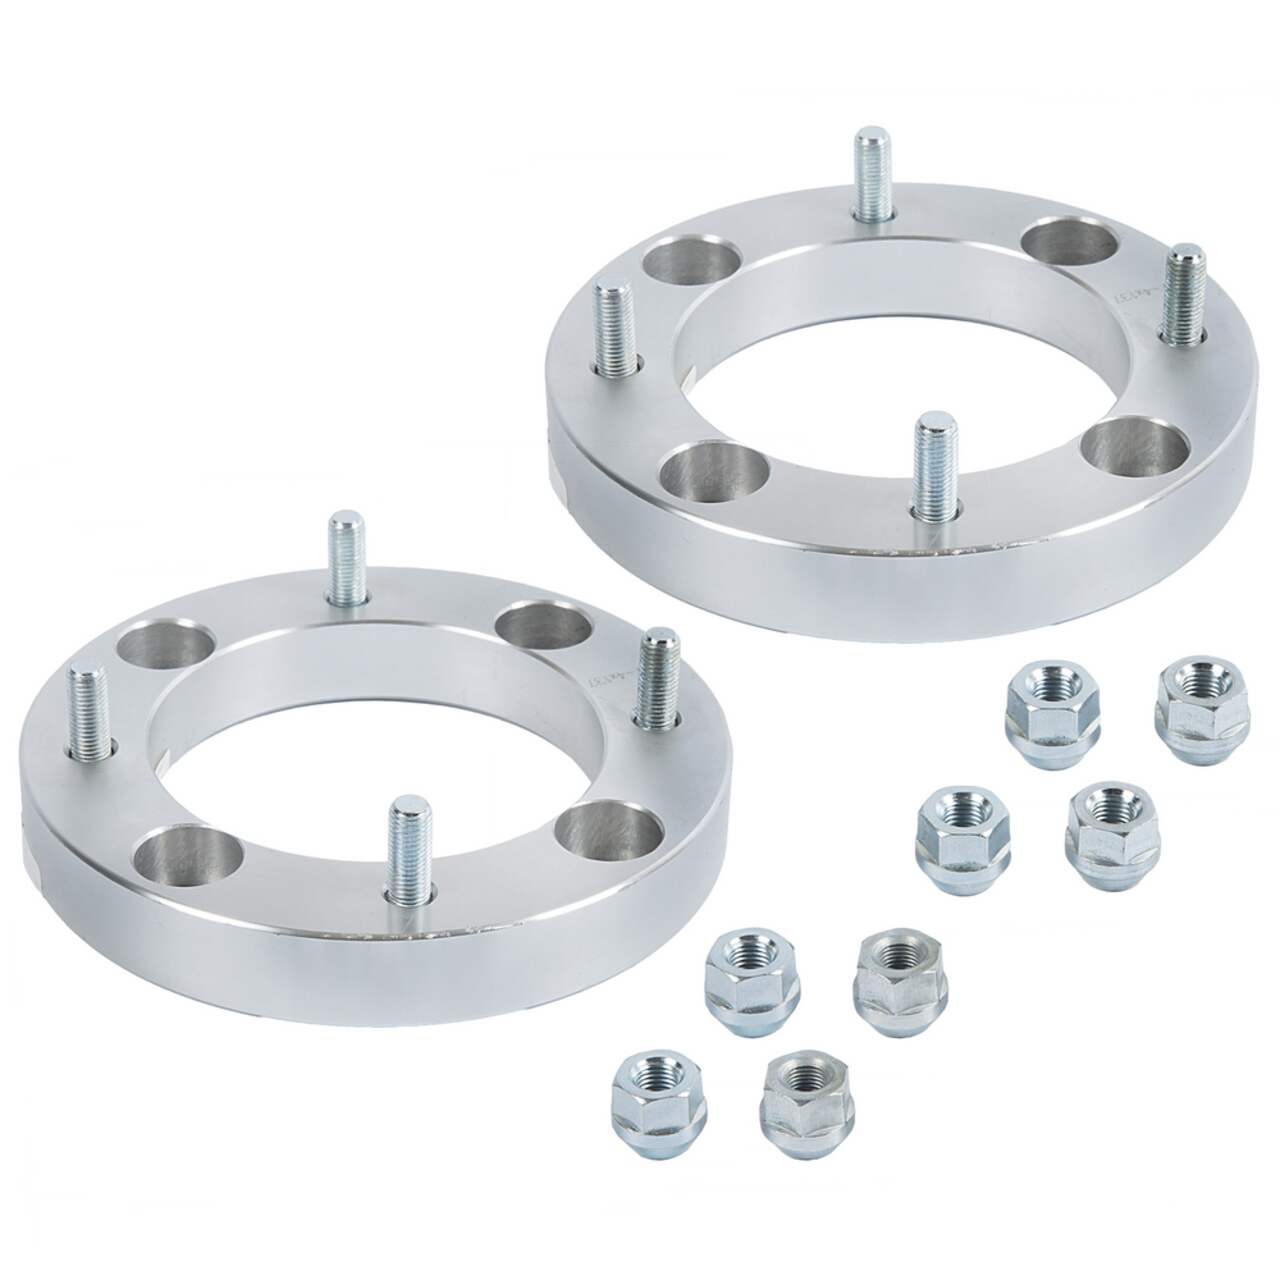 https://media-www.canadiantire.ca/product/automotive/automotive-outdoor-adventure/powersport/1271042/kimpex-spacers-wt4-156-15-pair--88e94117-71b6-4af2-a9e8-cde8b8143f3e.png?imdensity=1&imwidth=640&impolicy=mZoom